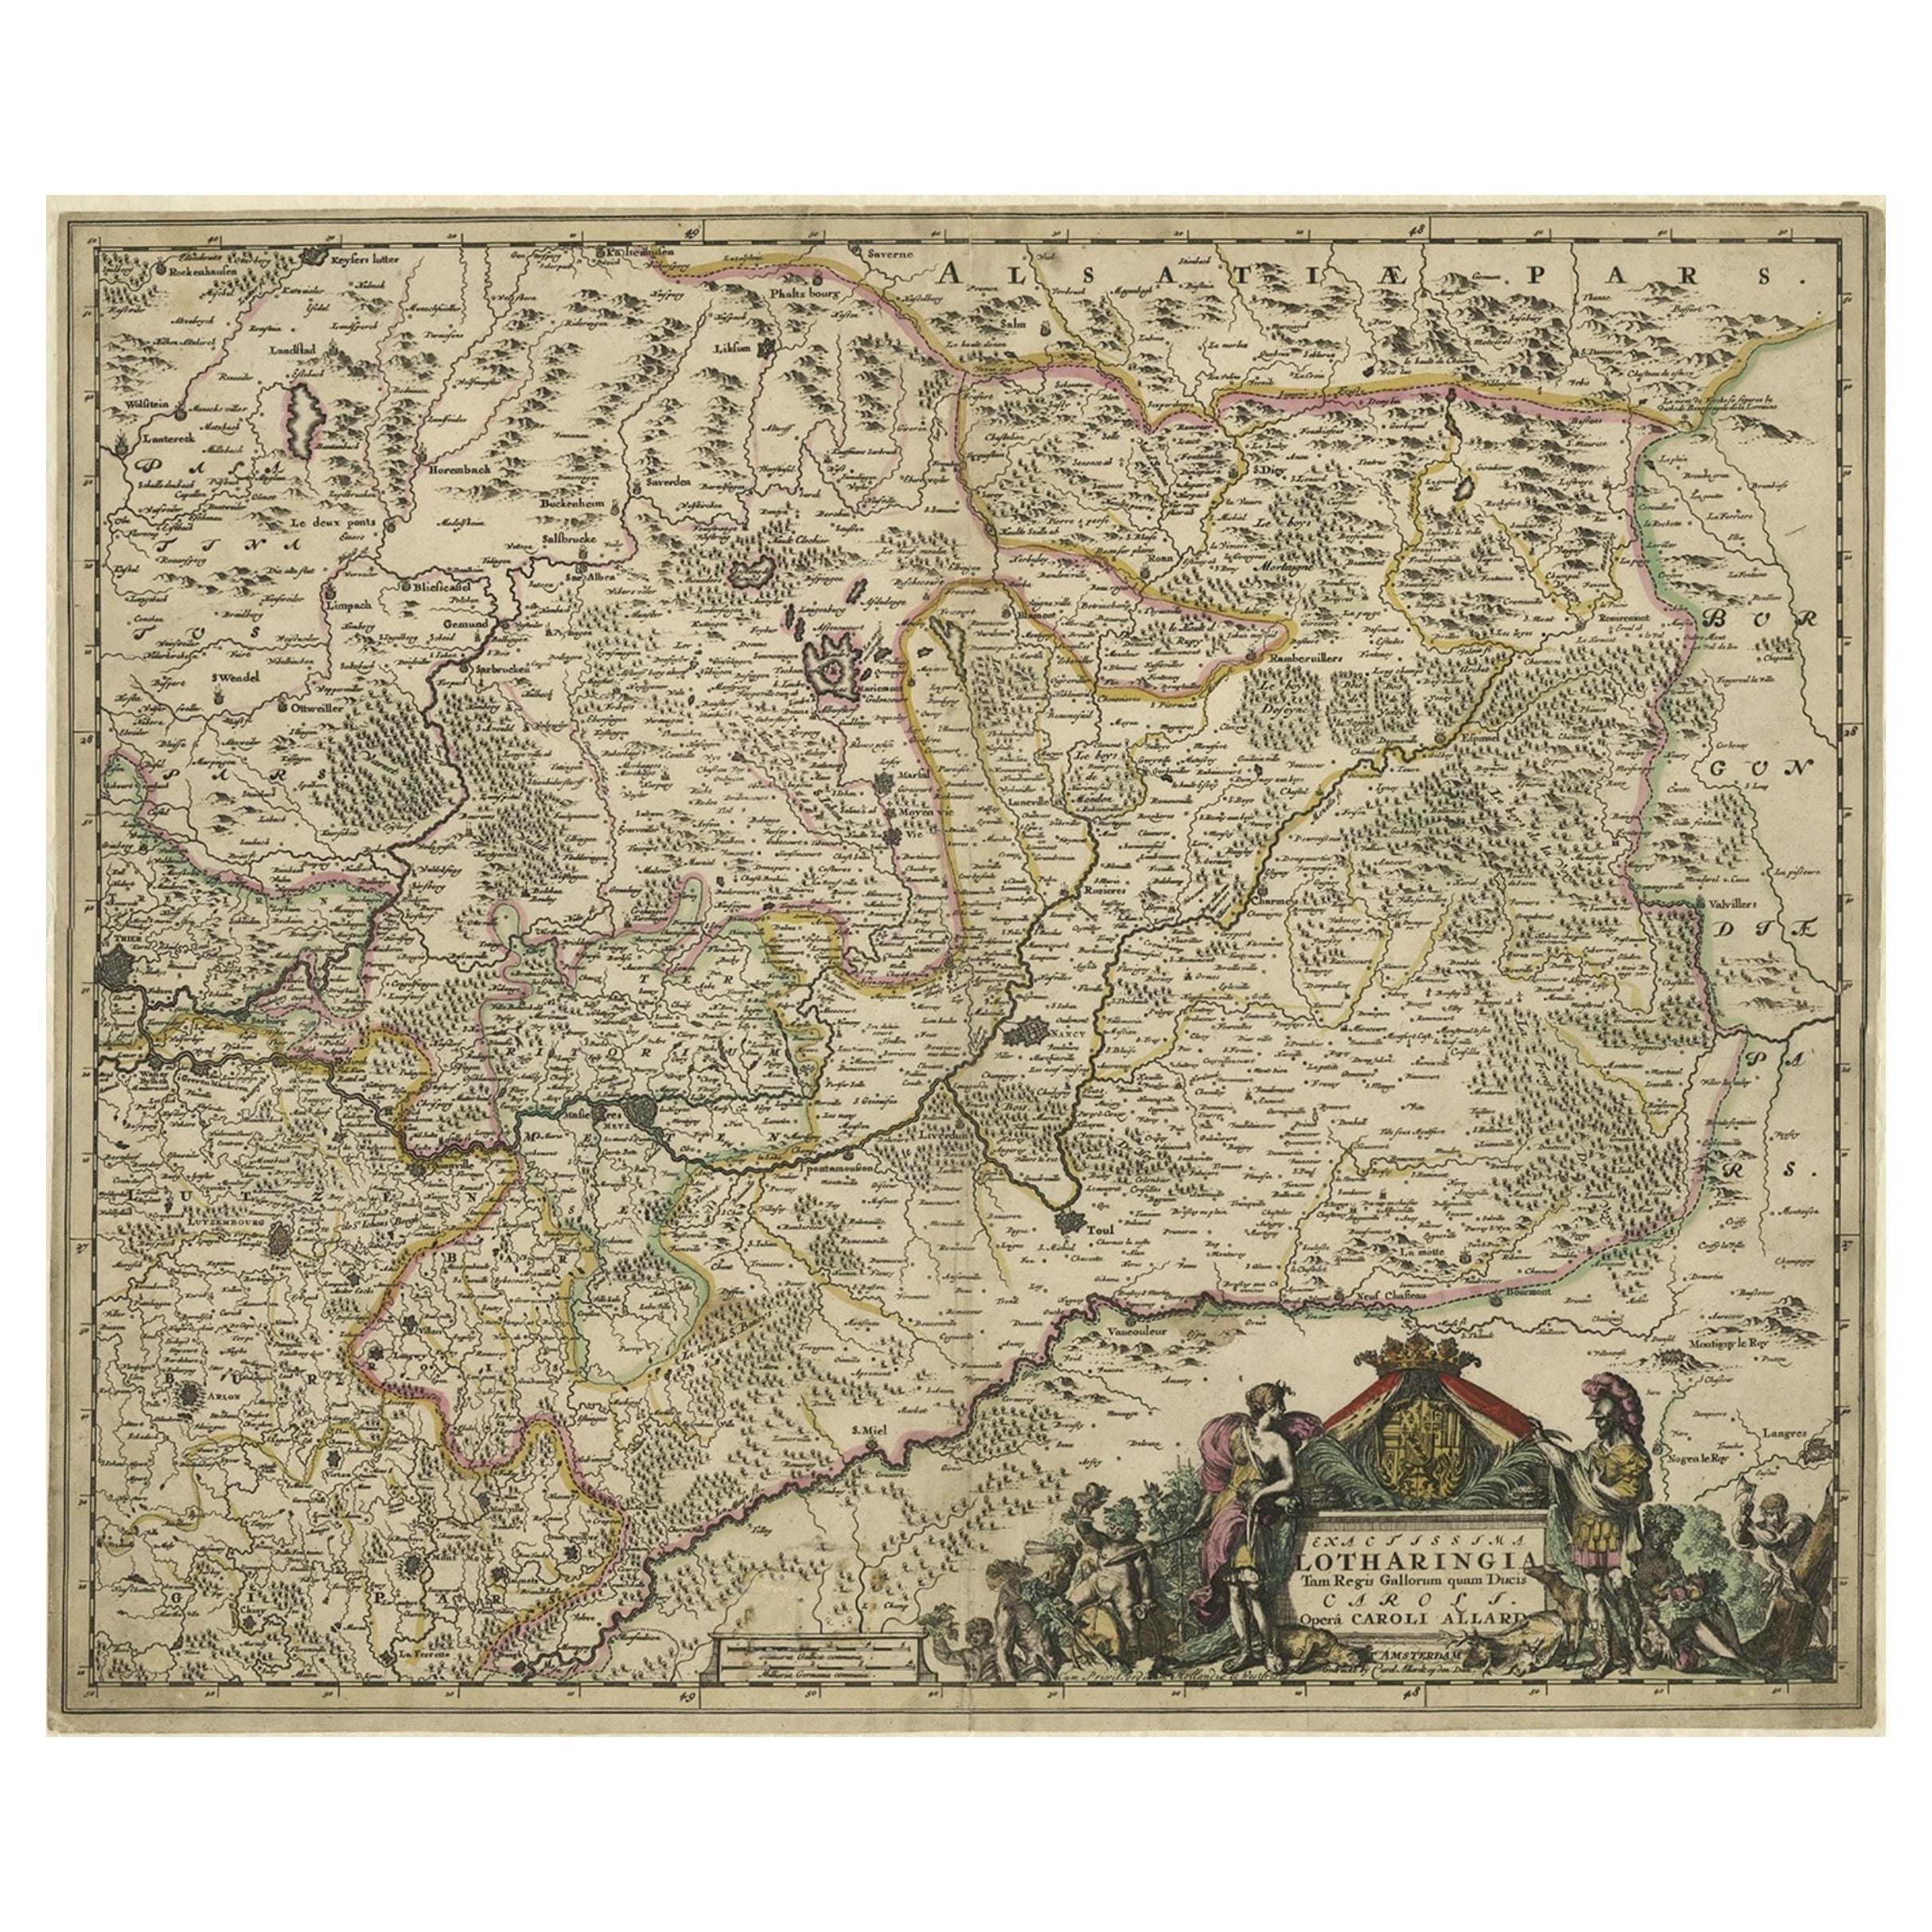 Striking Antique Map of Luxembourg and Northern France 'Lotharingen', c.1680 For Sale